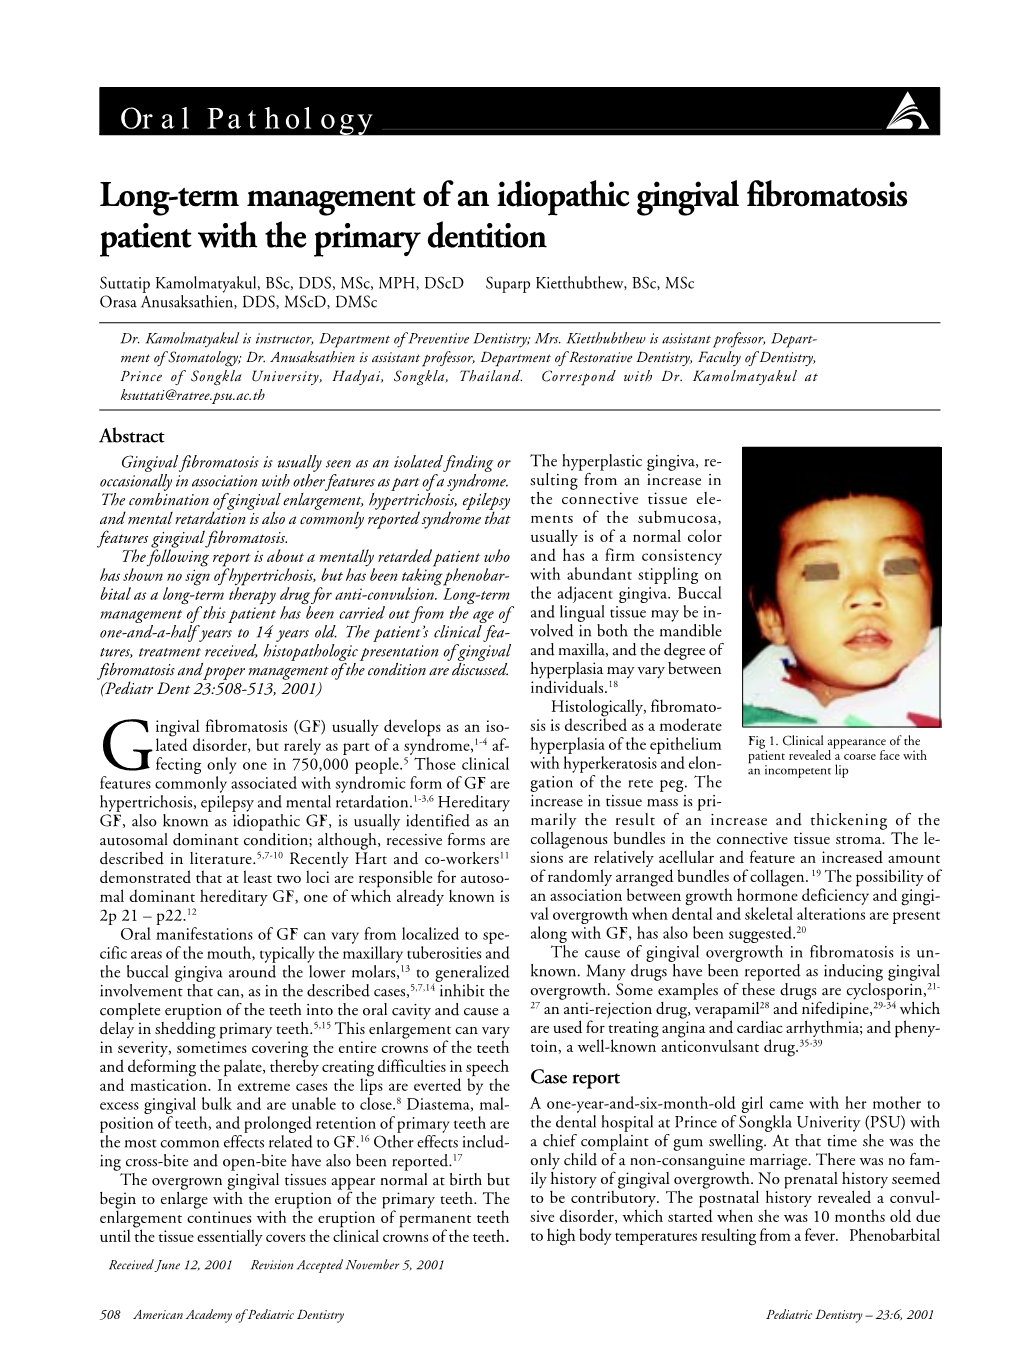 Long-Term Management of an Idiopathic Gingival Fibromatosis Patient with the Primary Dentition